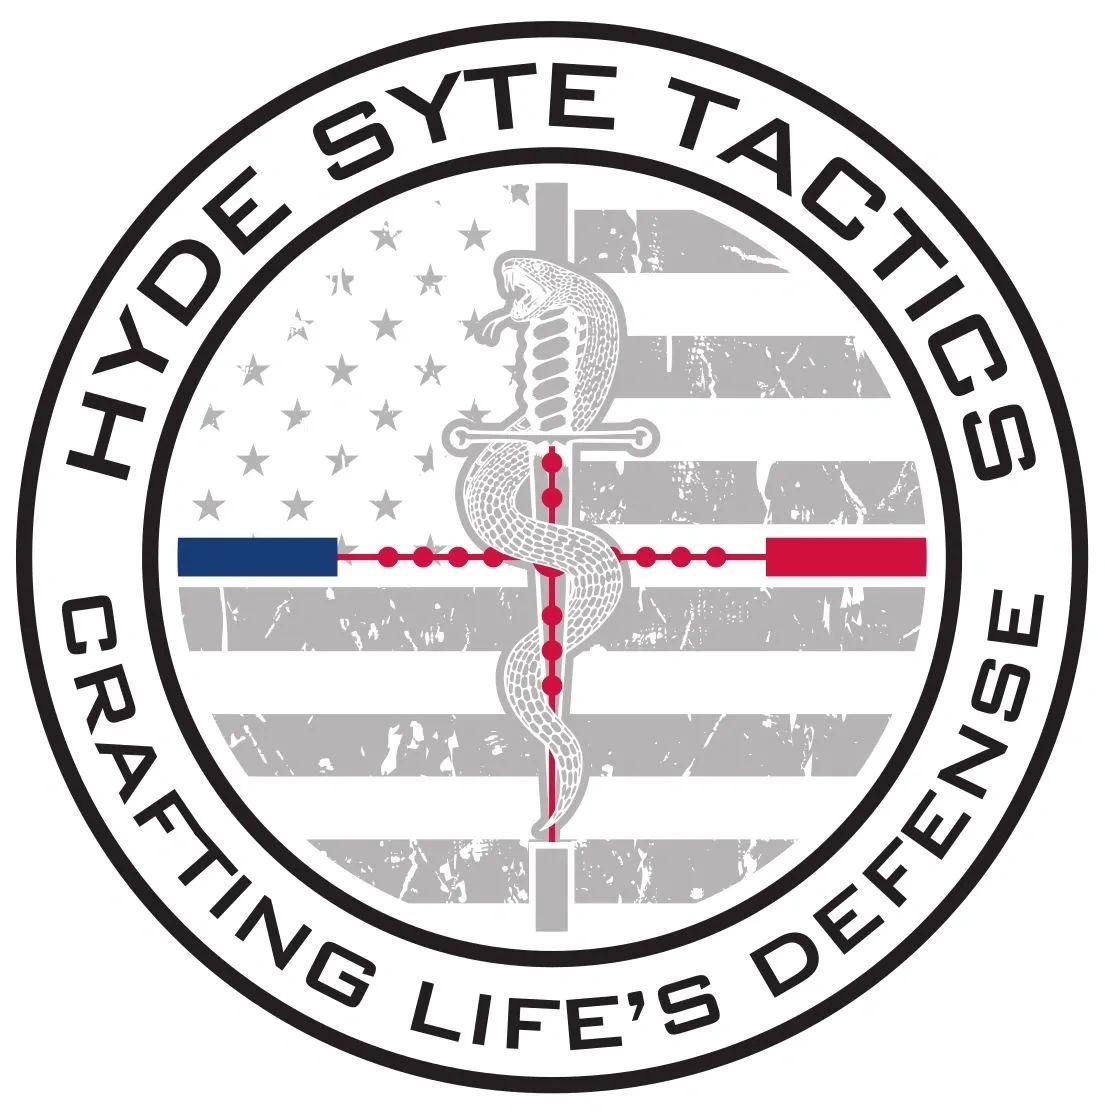 hyde syte tactics harland